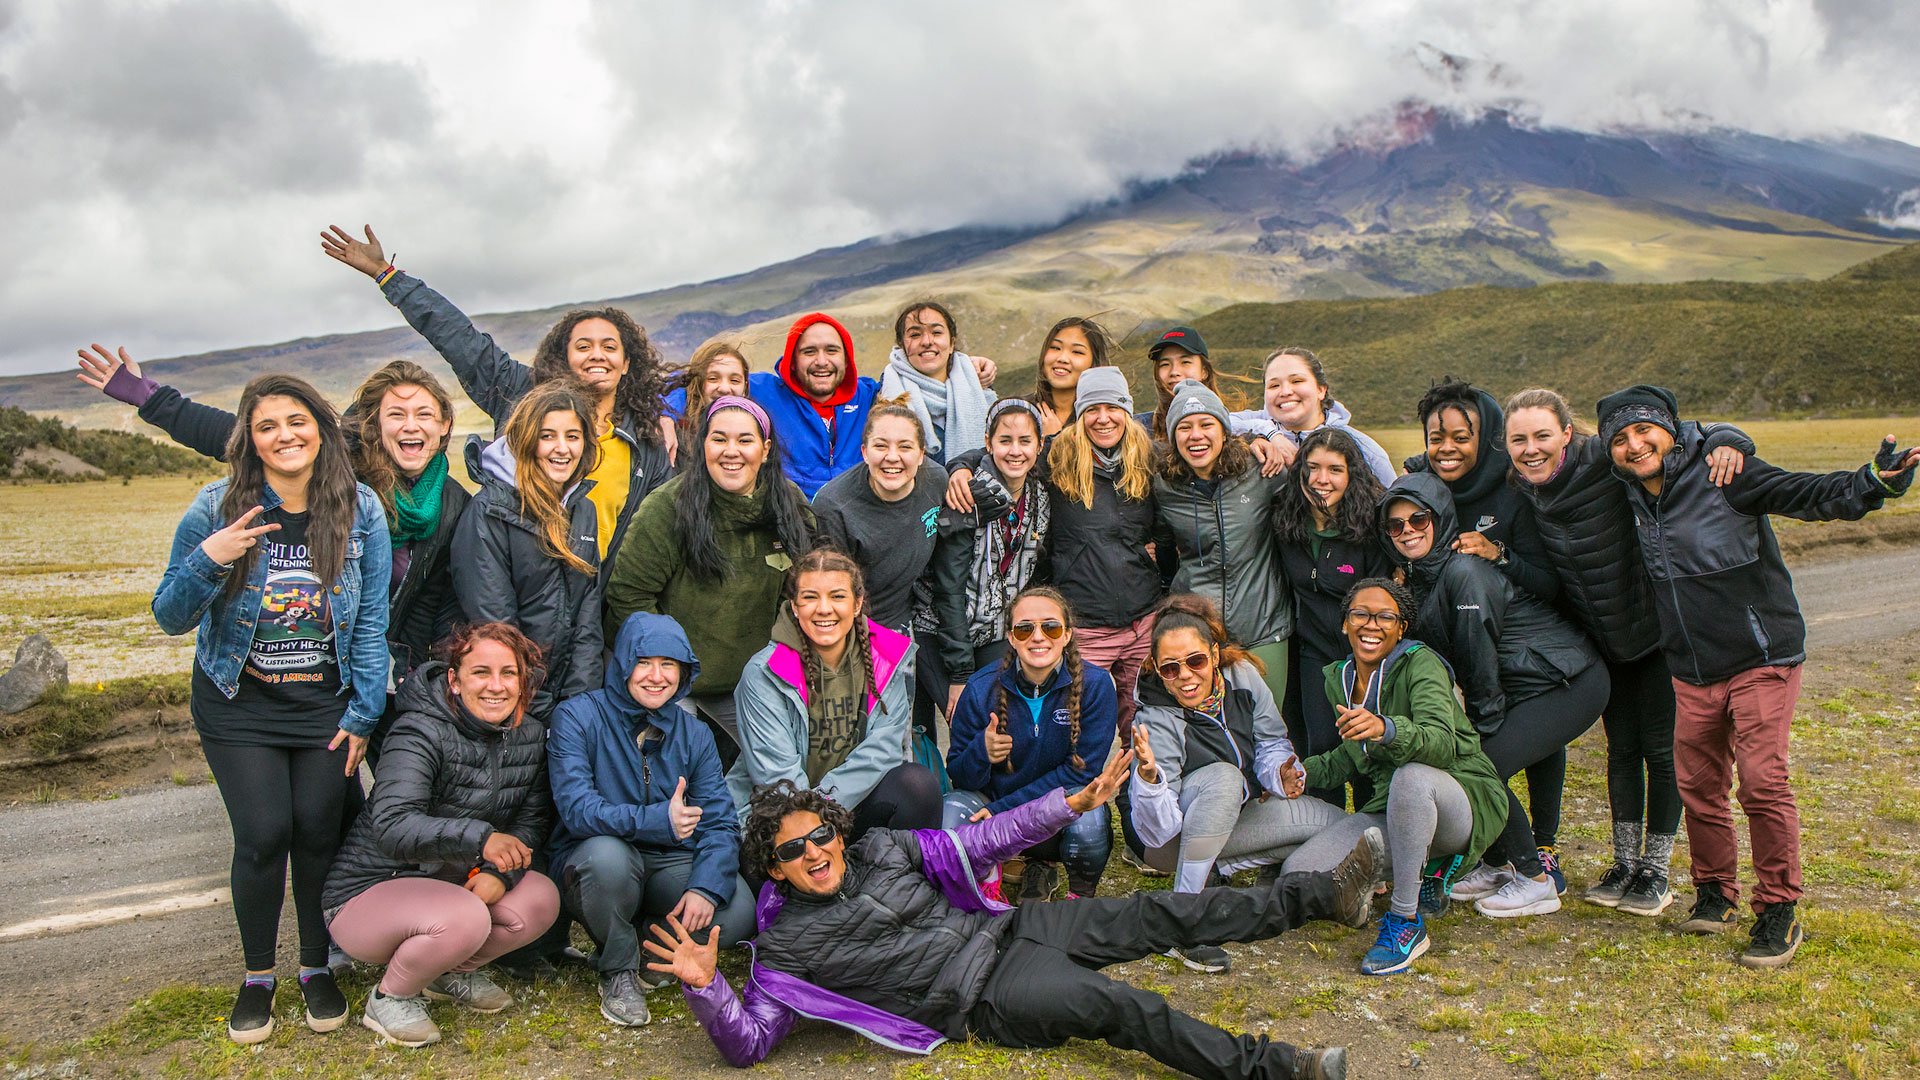 FAM Tour group in front of the famous, live Cotopaxi volcano